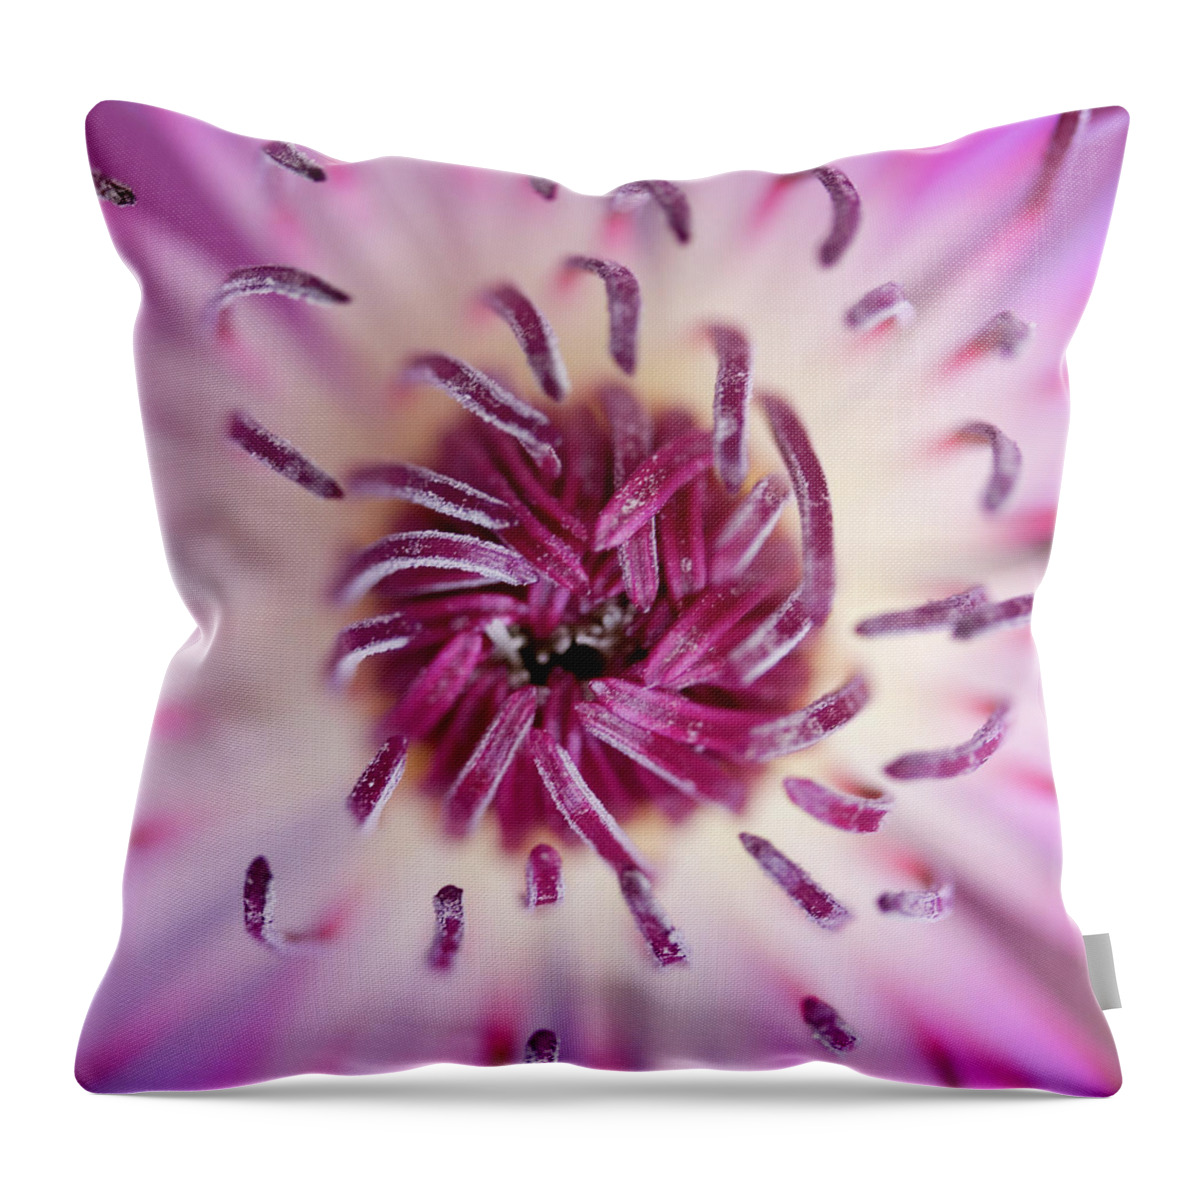 Amaryllis Throw Pillow featuring the photograph Amaryllis by Nigel R Bell